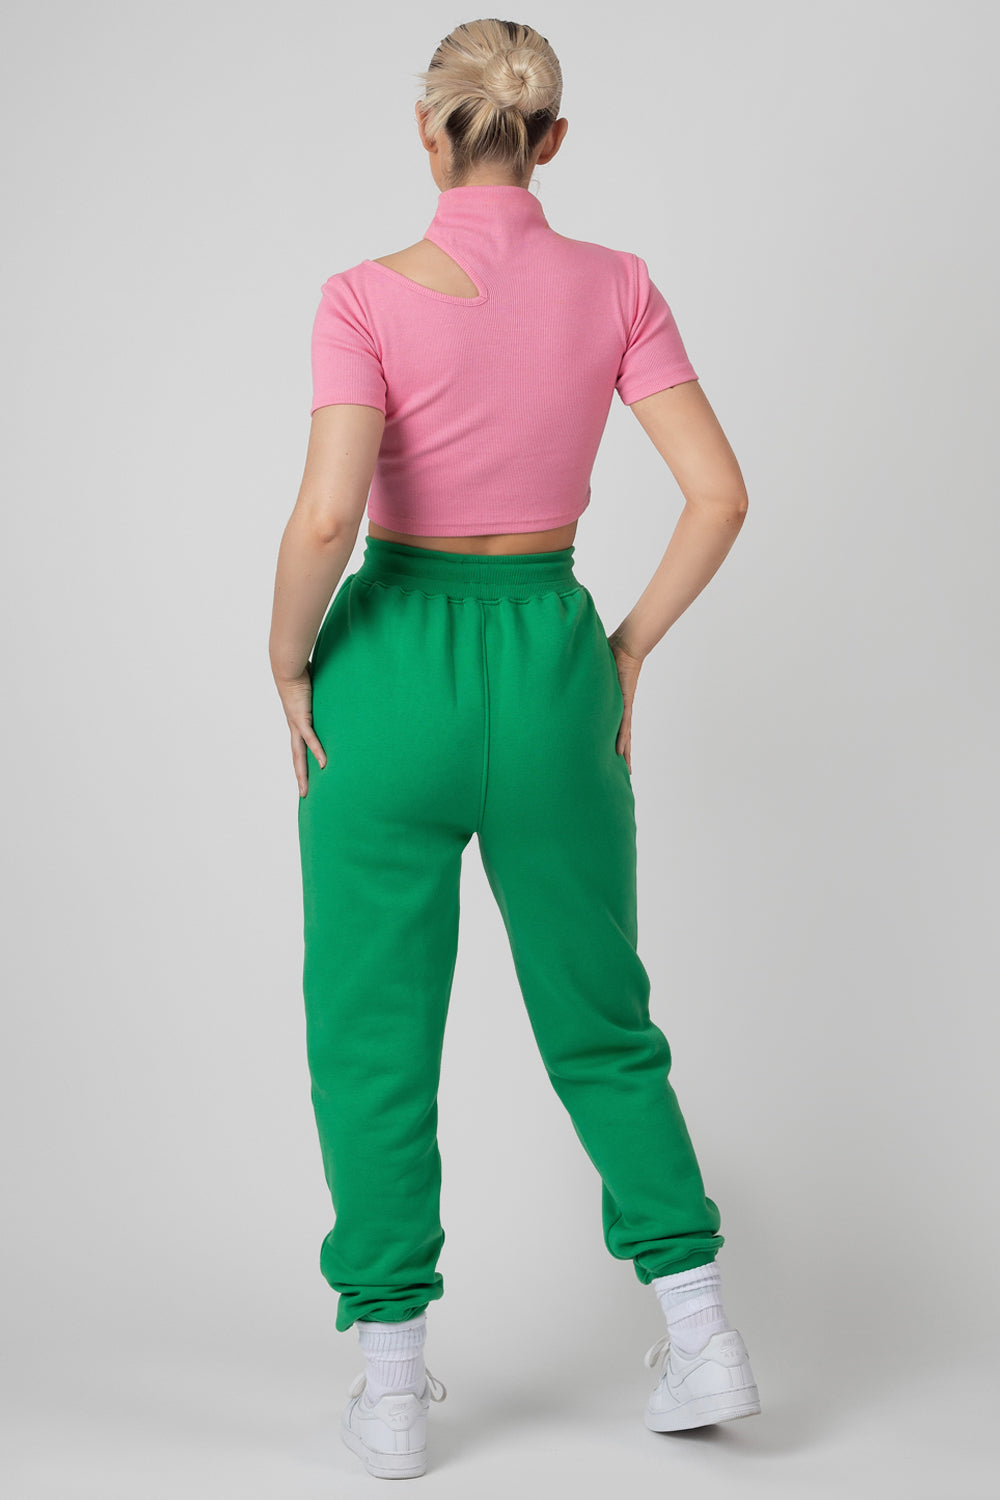 HIGH NECK RIBBED CUT OUT CROPPED T SHIRT PINK